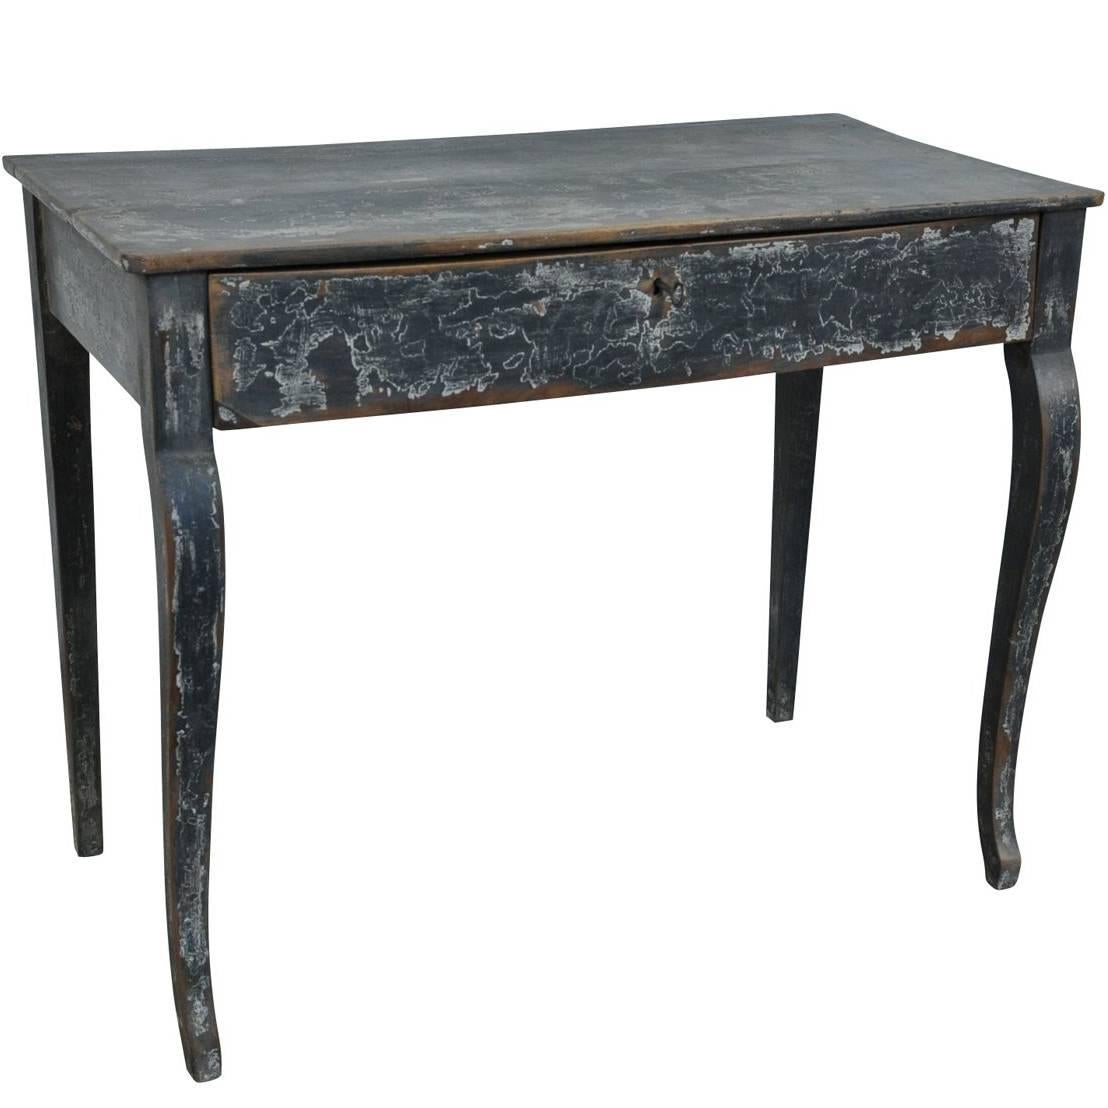 Spanish 19th Century Small Desk or Side Table